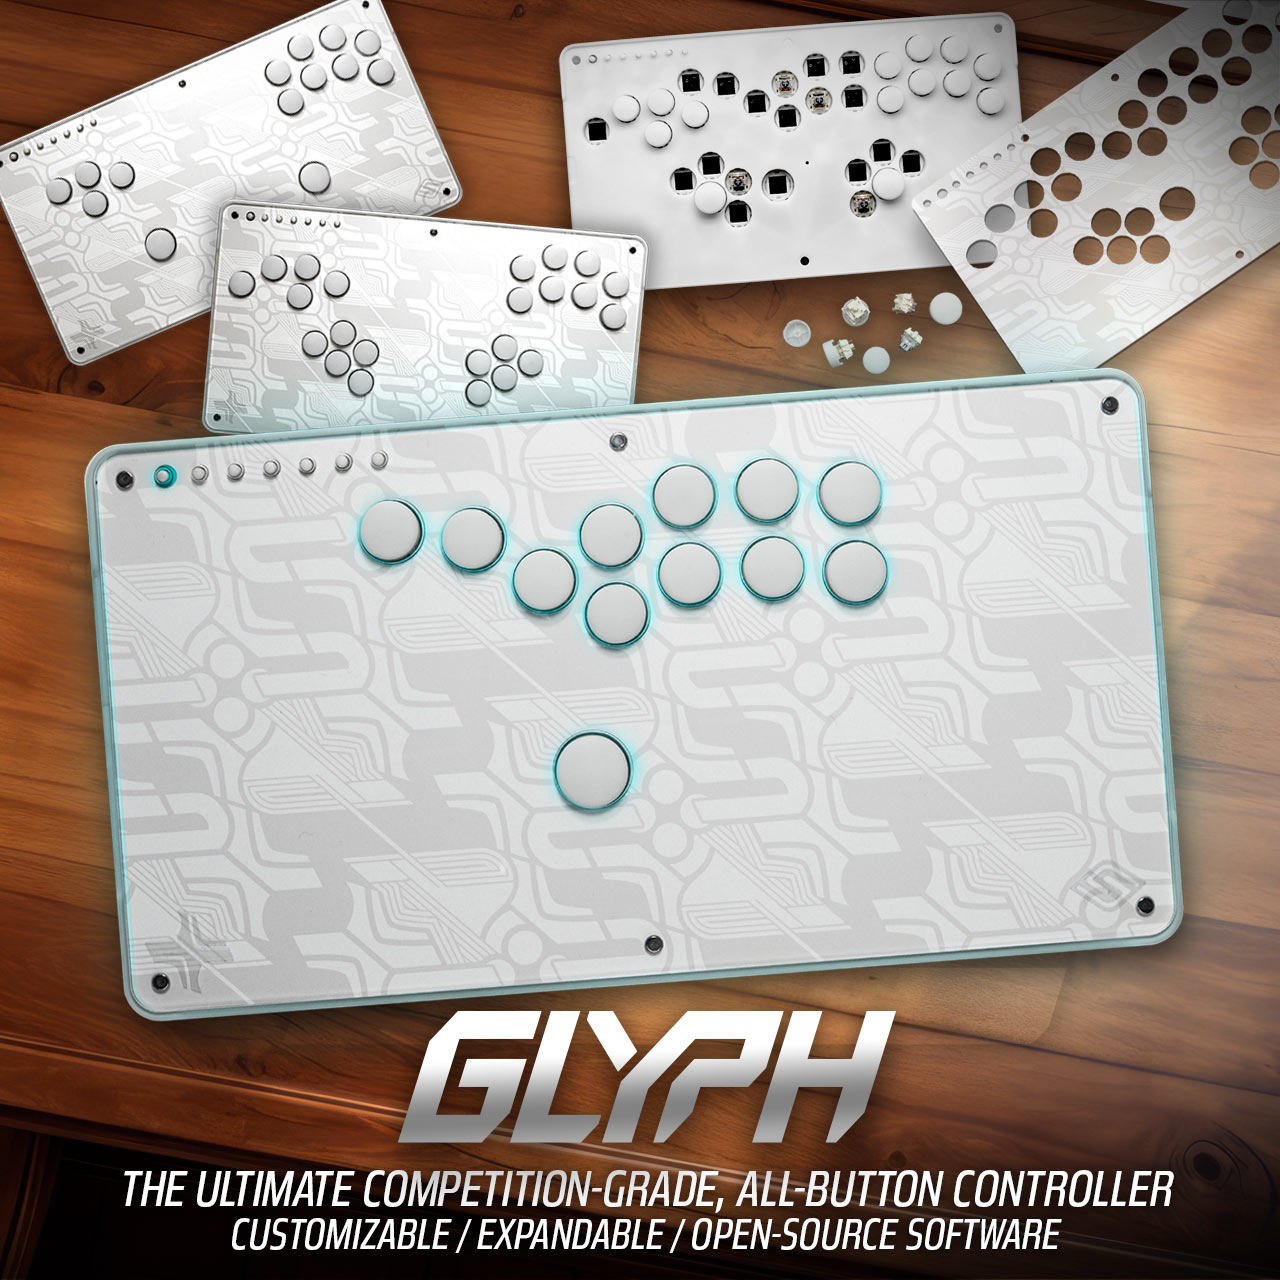 Glyph - The Ultimate Competition-grade All-button Controller